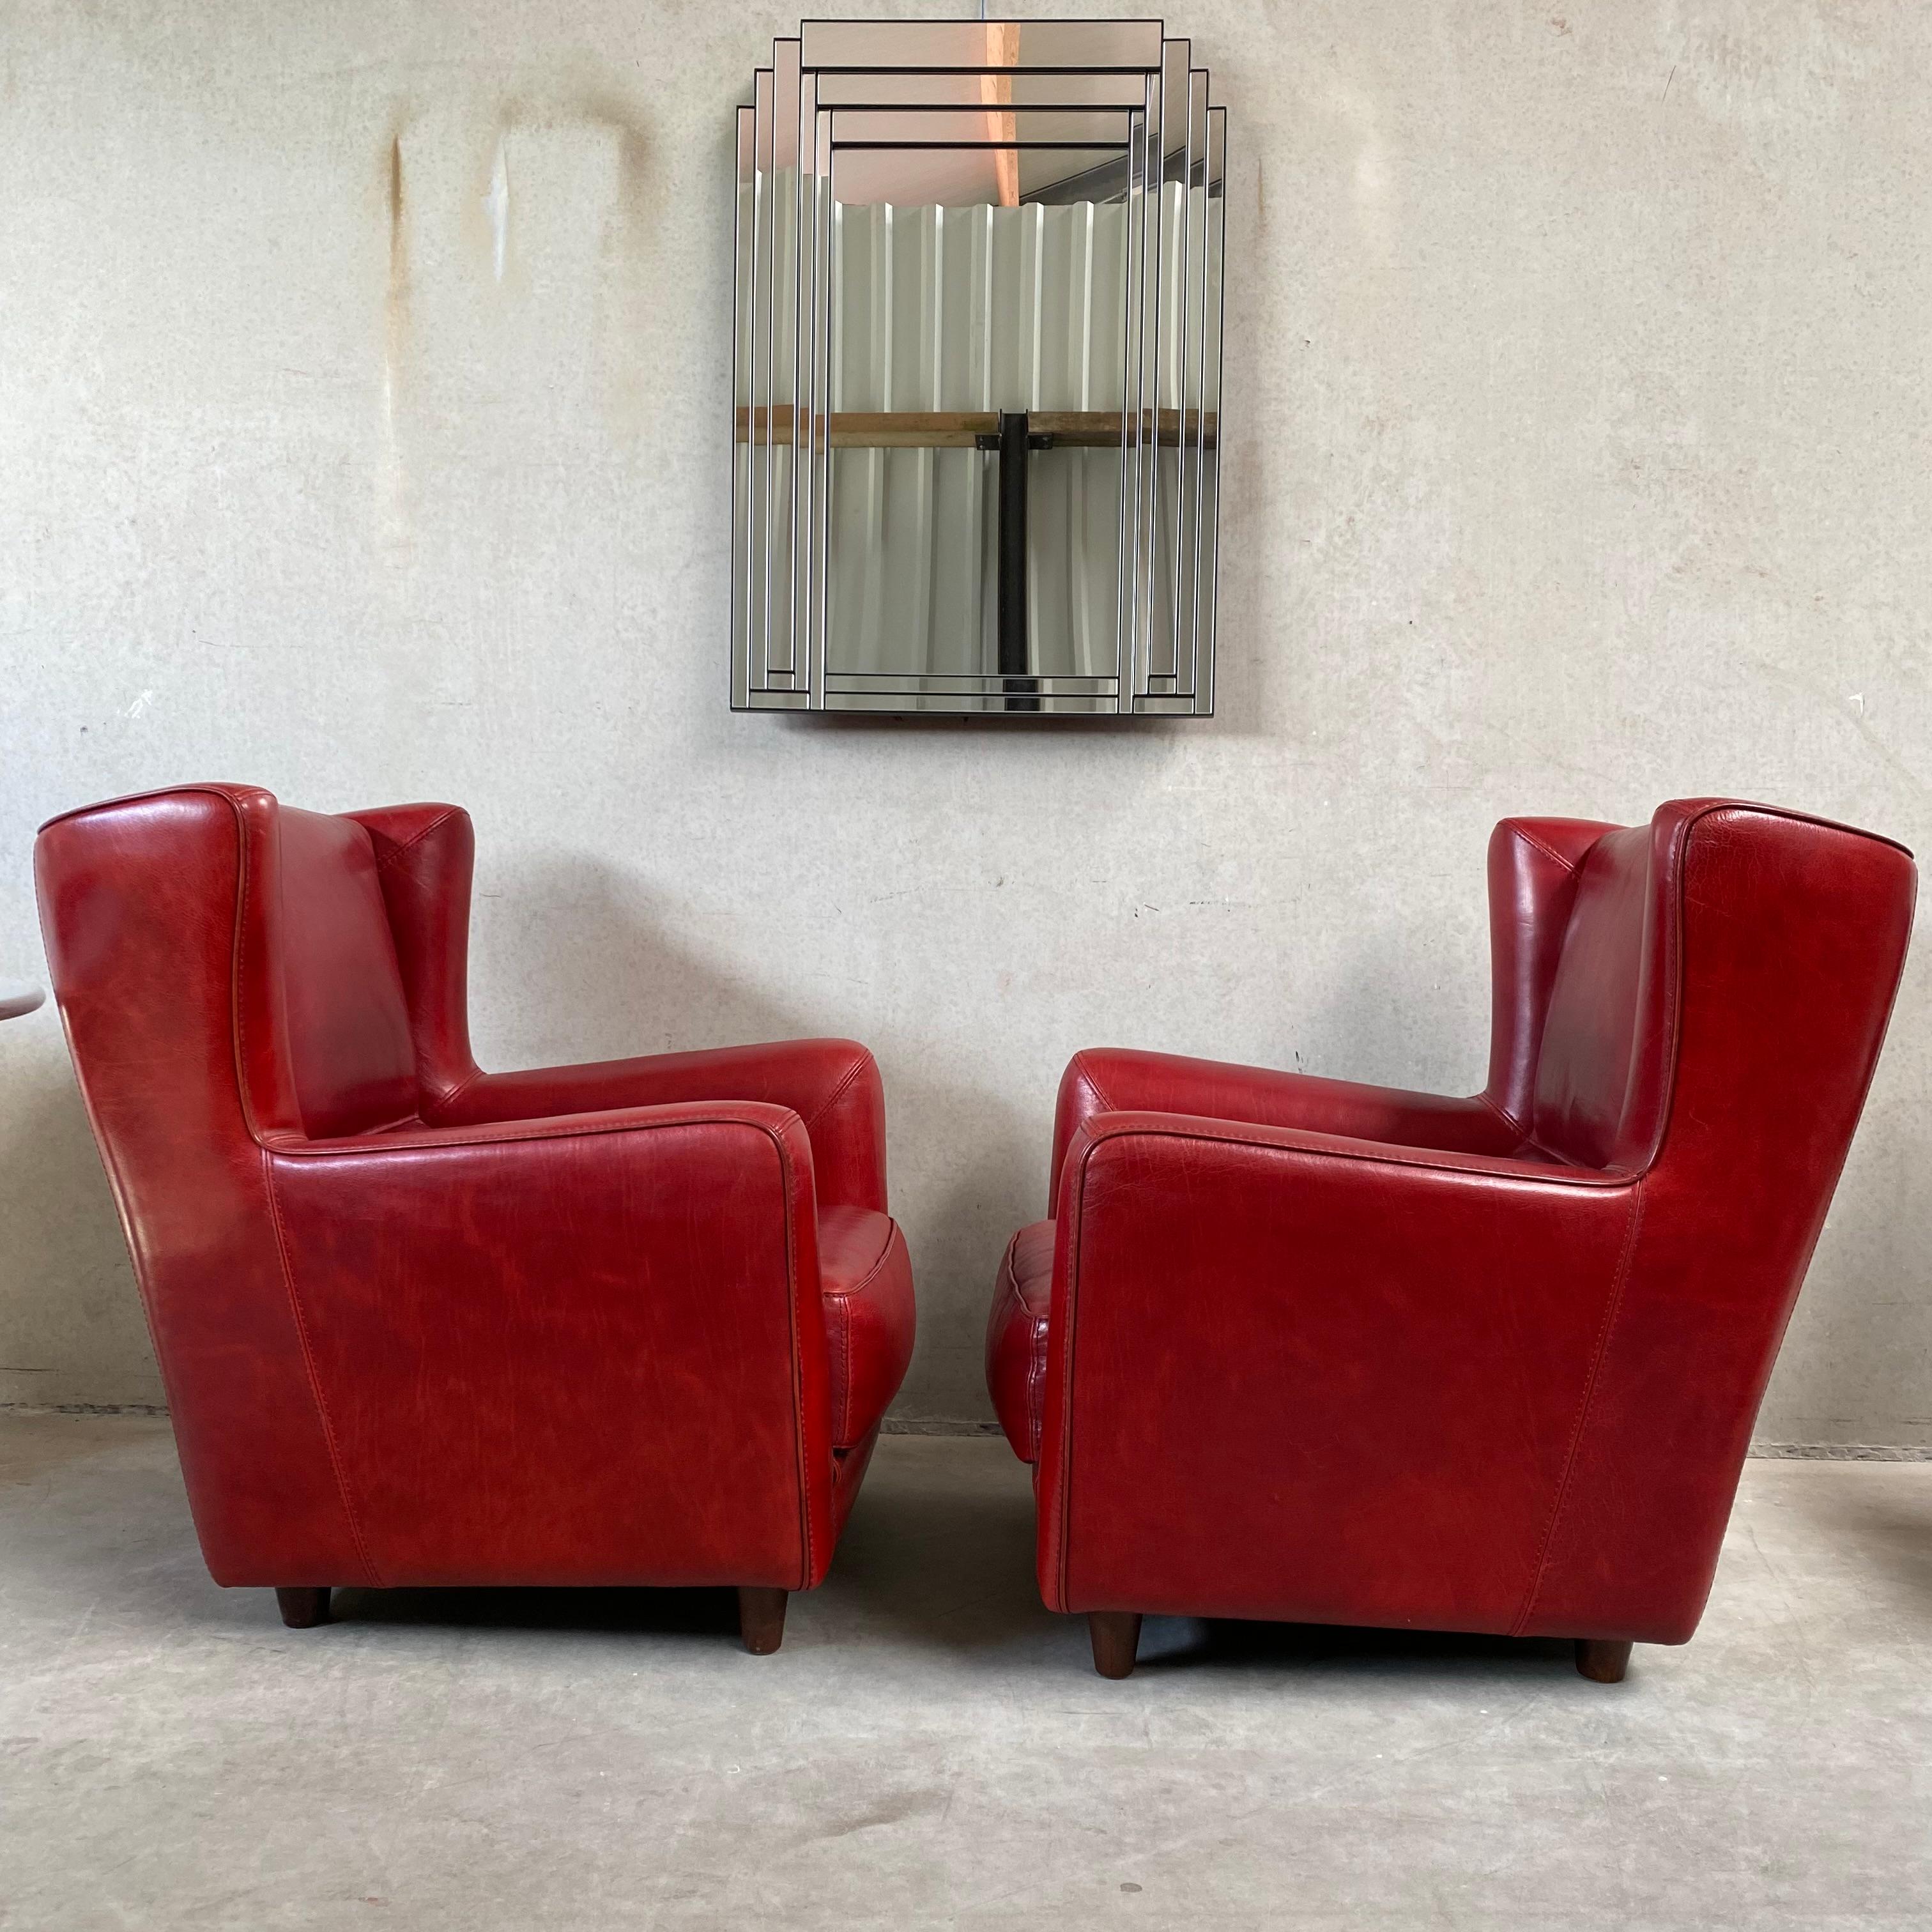 Pair of Ox-Blood Red Leather Lounge Chairs Begére by Baxter Italy 90s For Sale 11